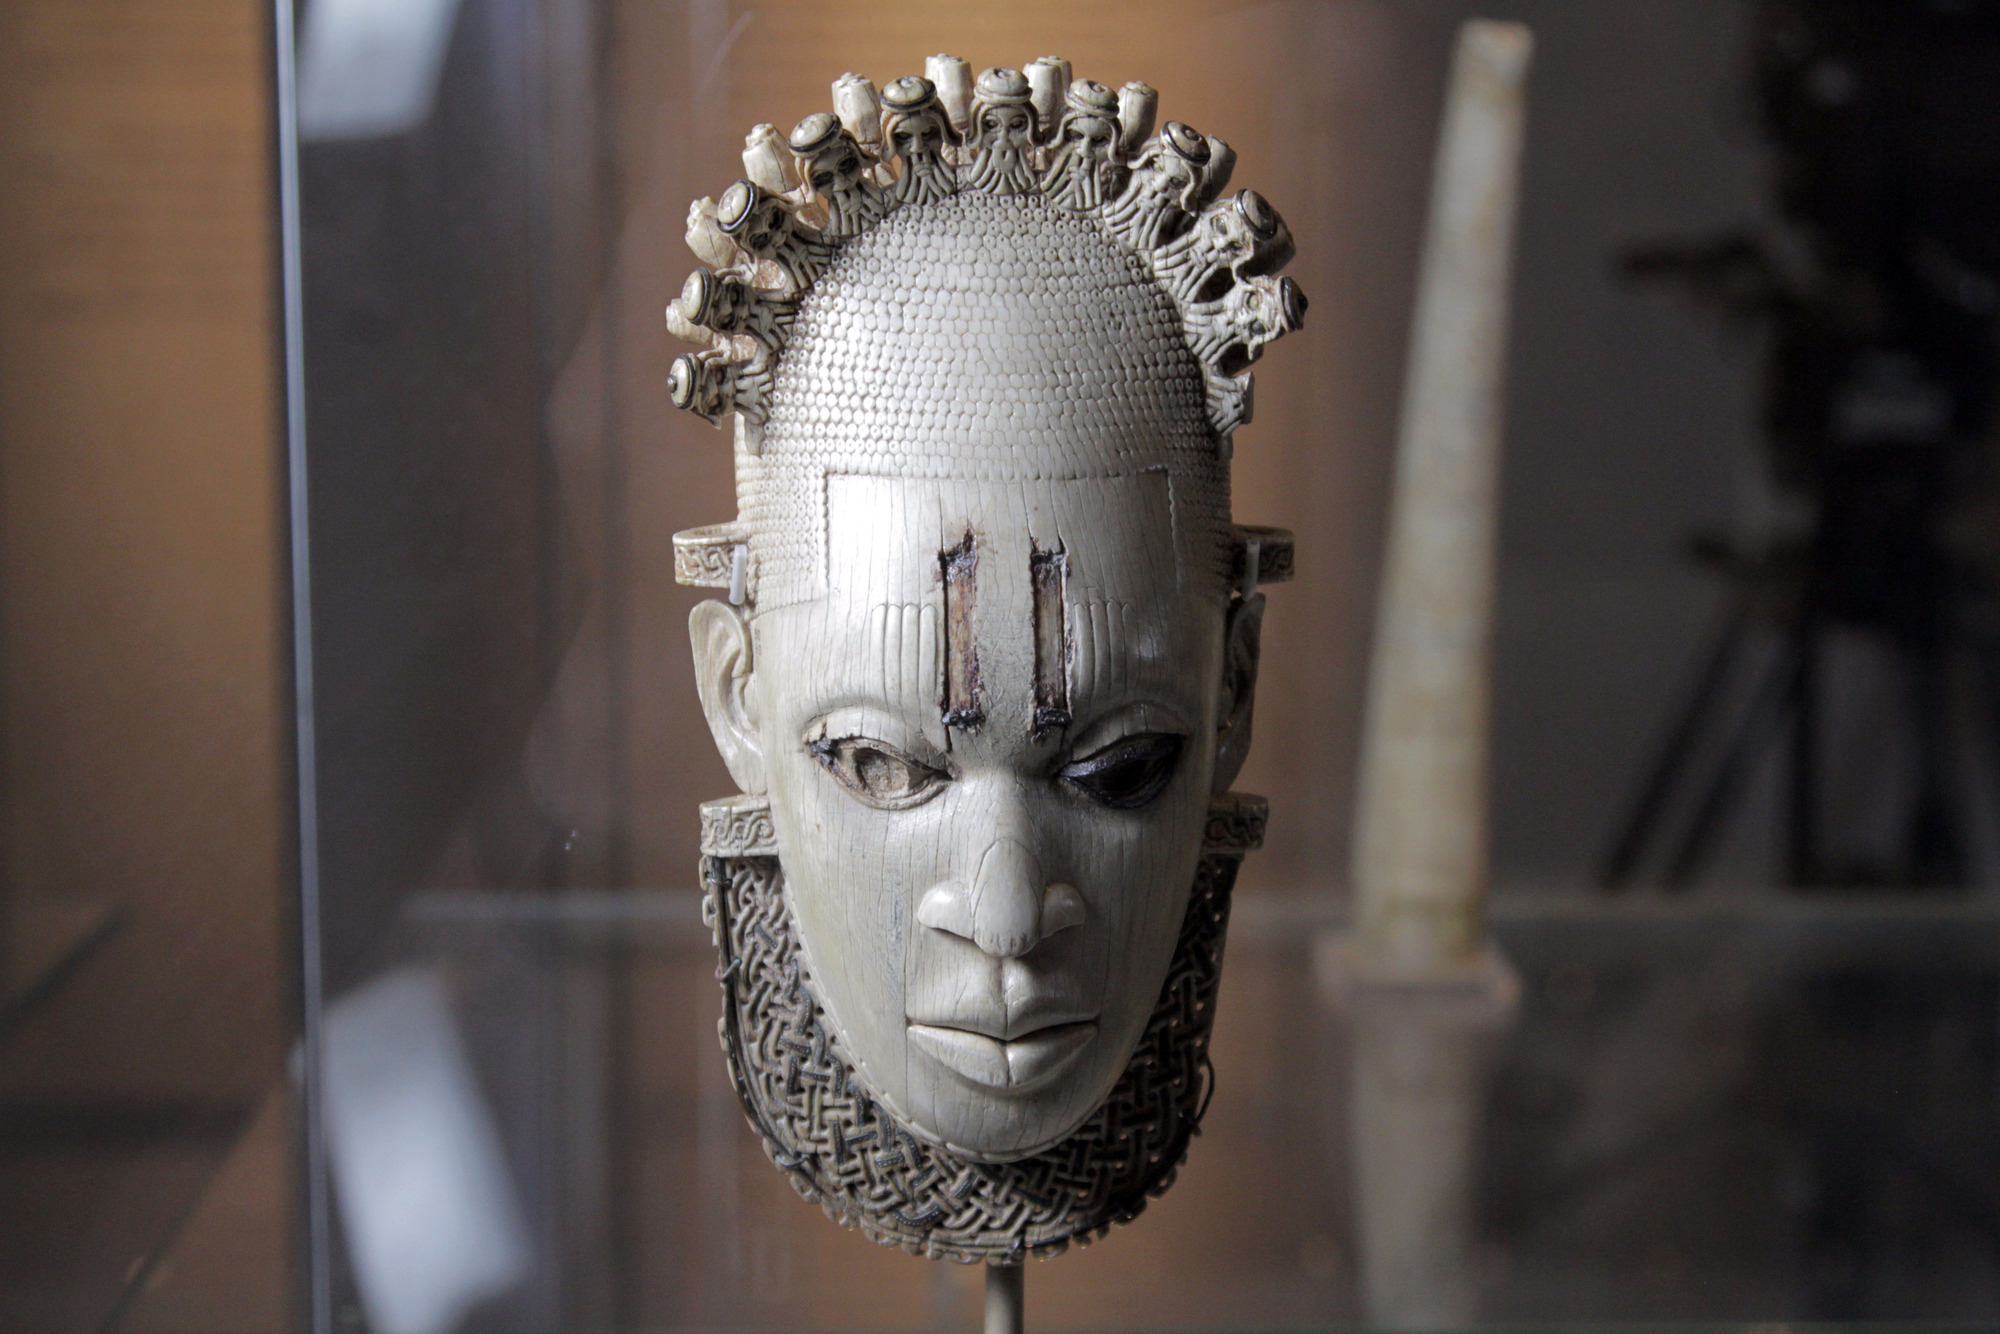 Carved Ivory mask-shaped hip pendant, inlaid with bronze Benin, Queen Idia, Artisit Unknown (16th century) British Museum, London. Photographer: Nutopia